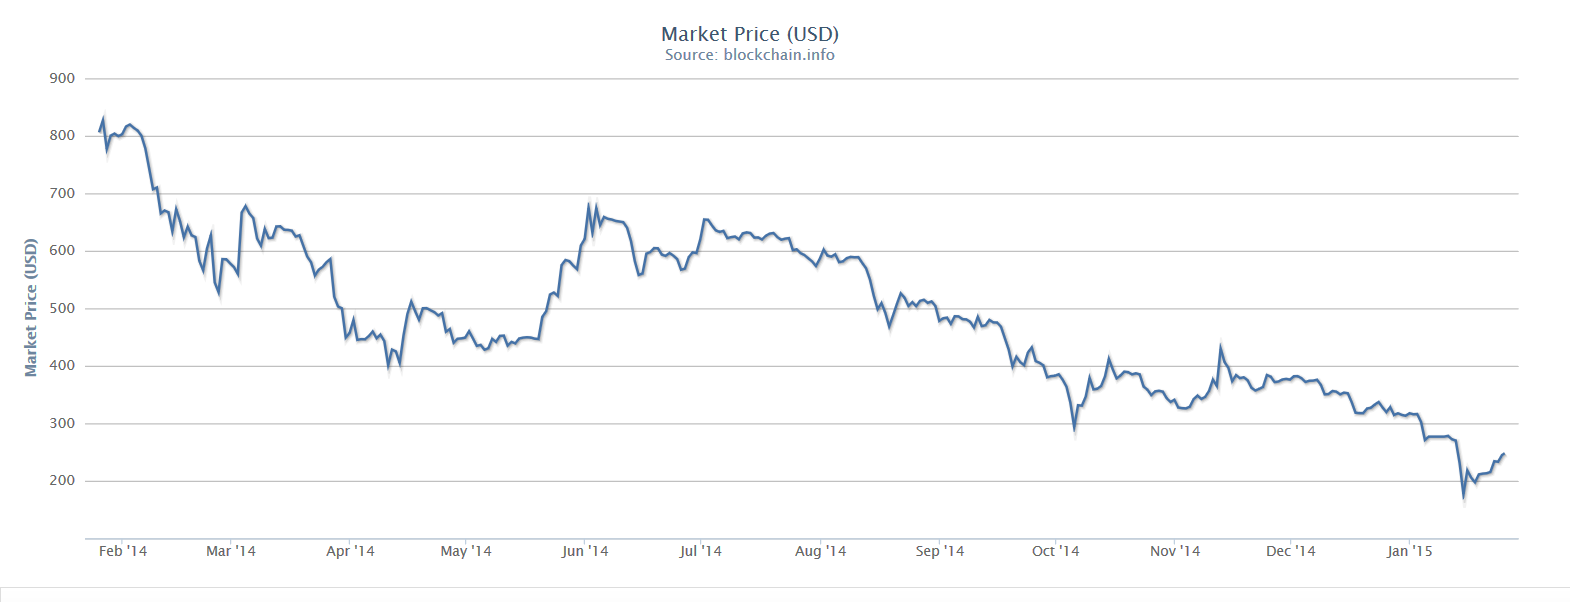 What is falling Bitcoin market price mean to the Bitcoin economy?